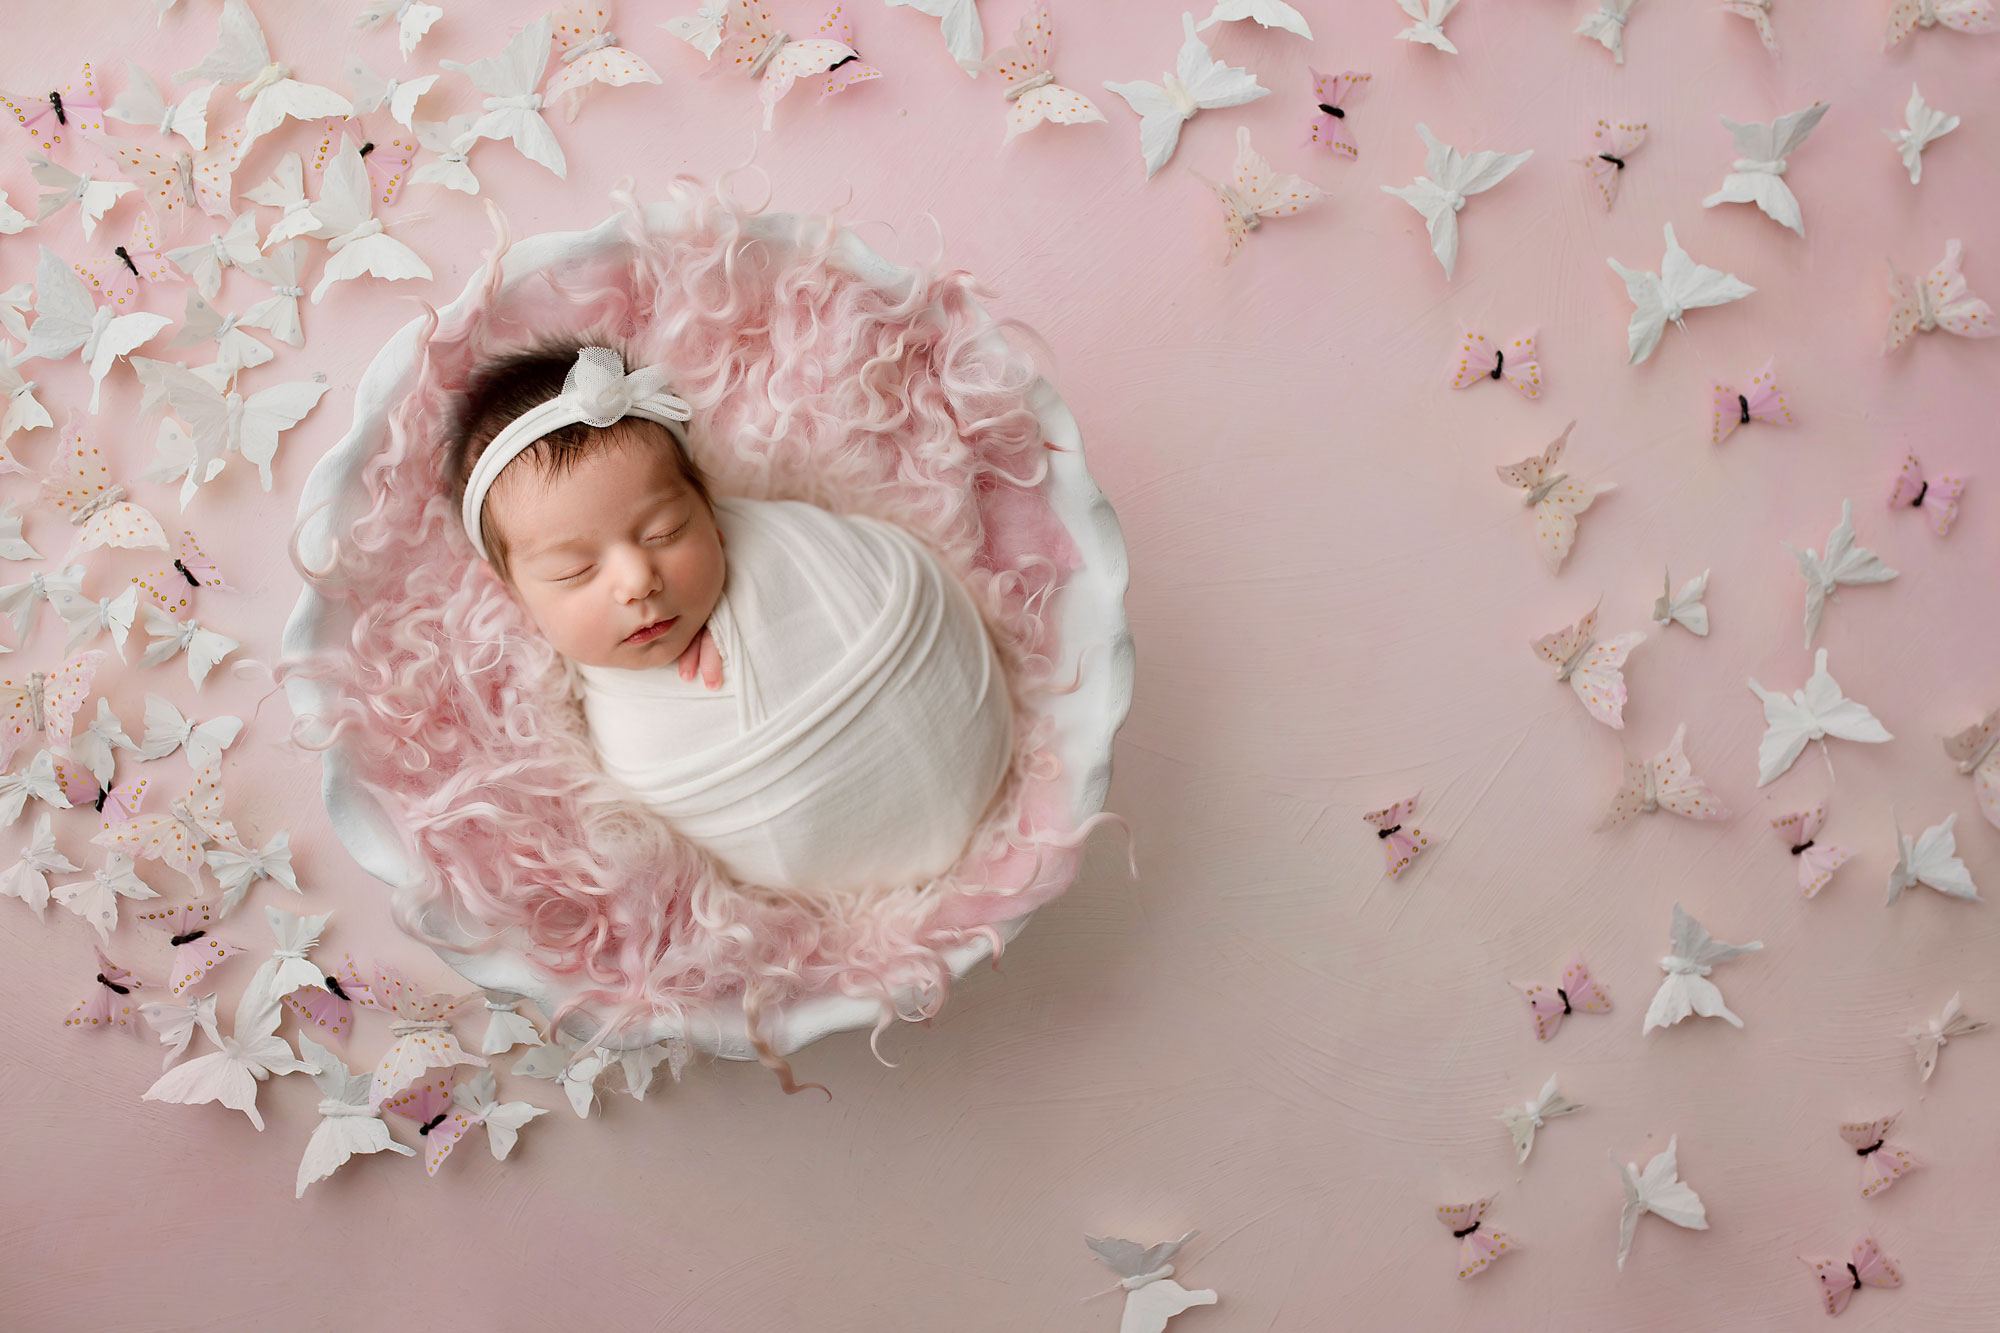 NJ newborn photographer capturing baby girl sleeping on a pink blanket surrounded by butterflies